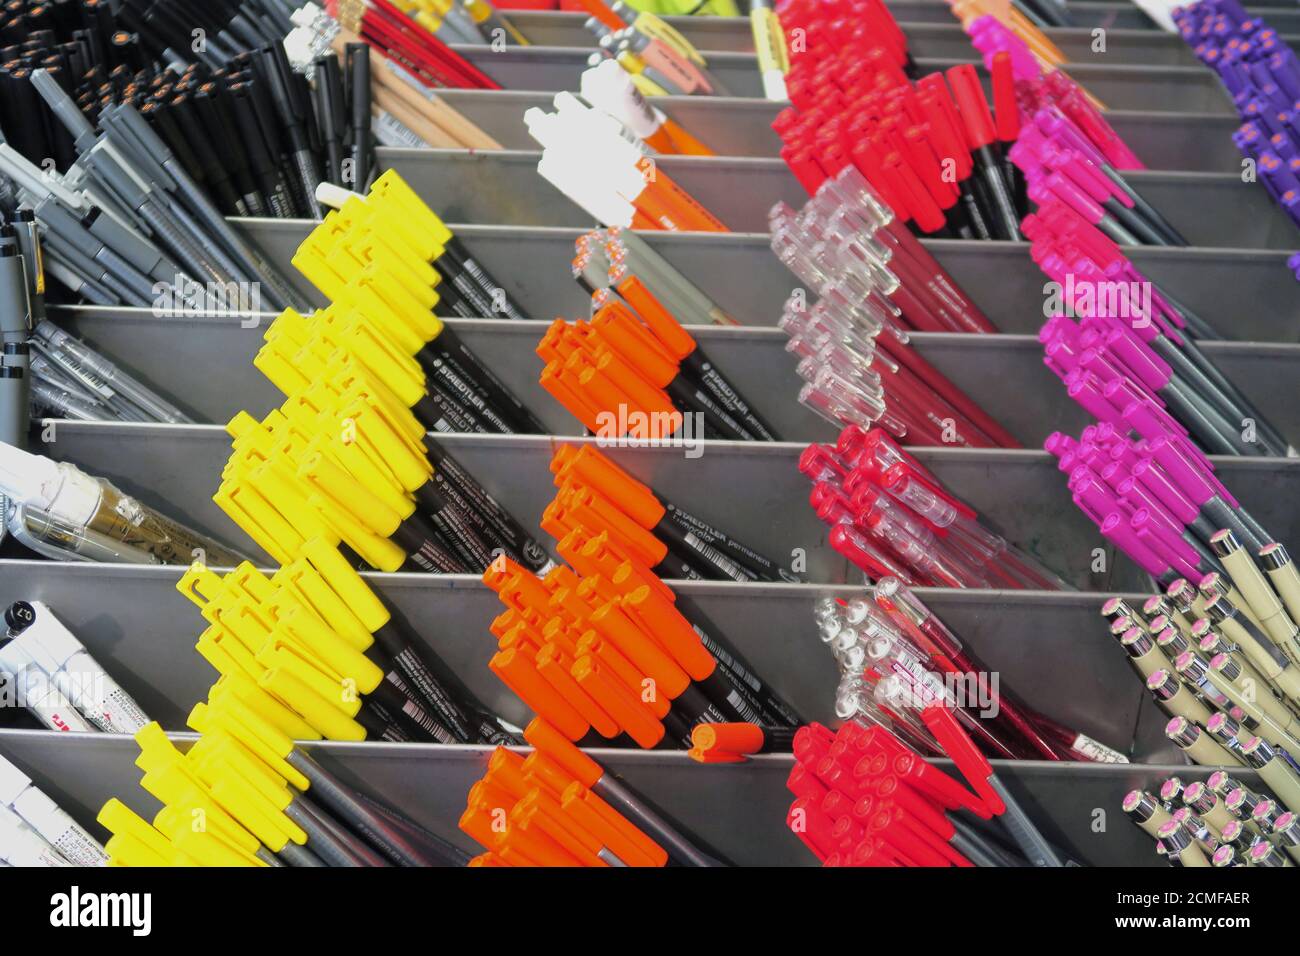 display of colour pens in a London store Stock Photo